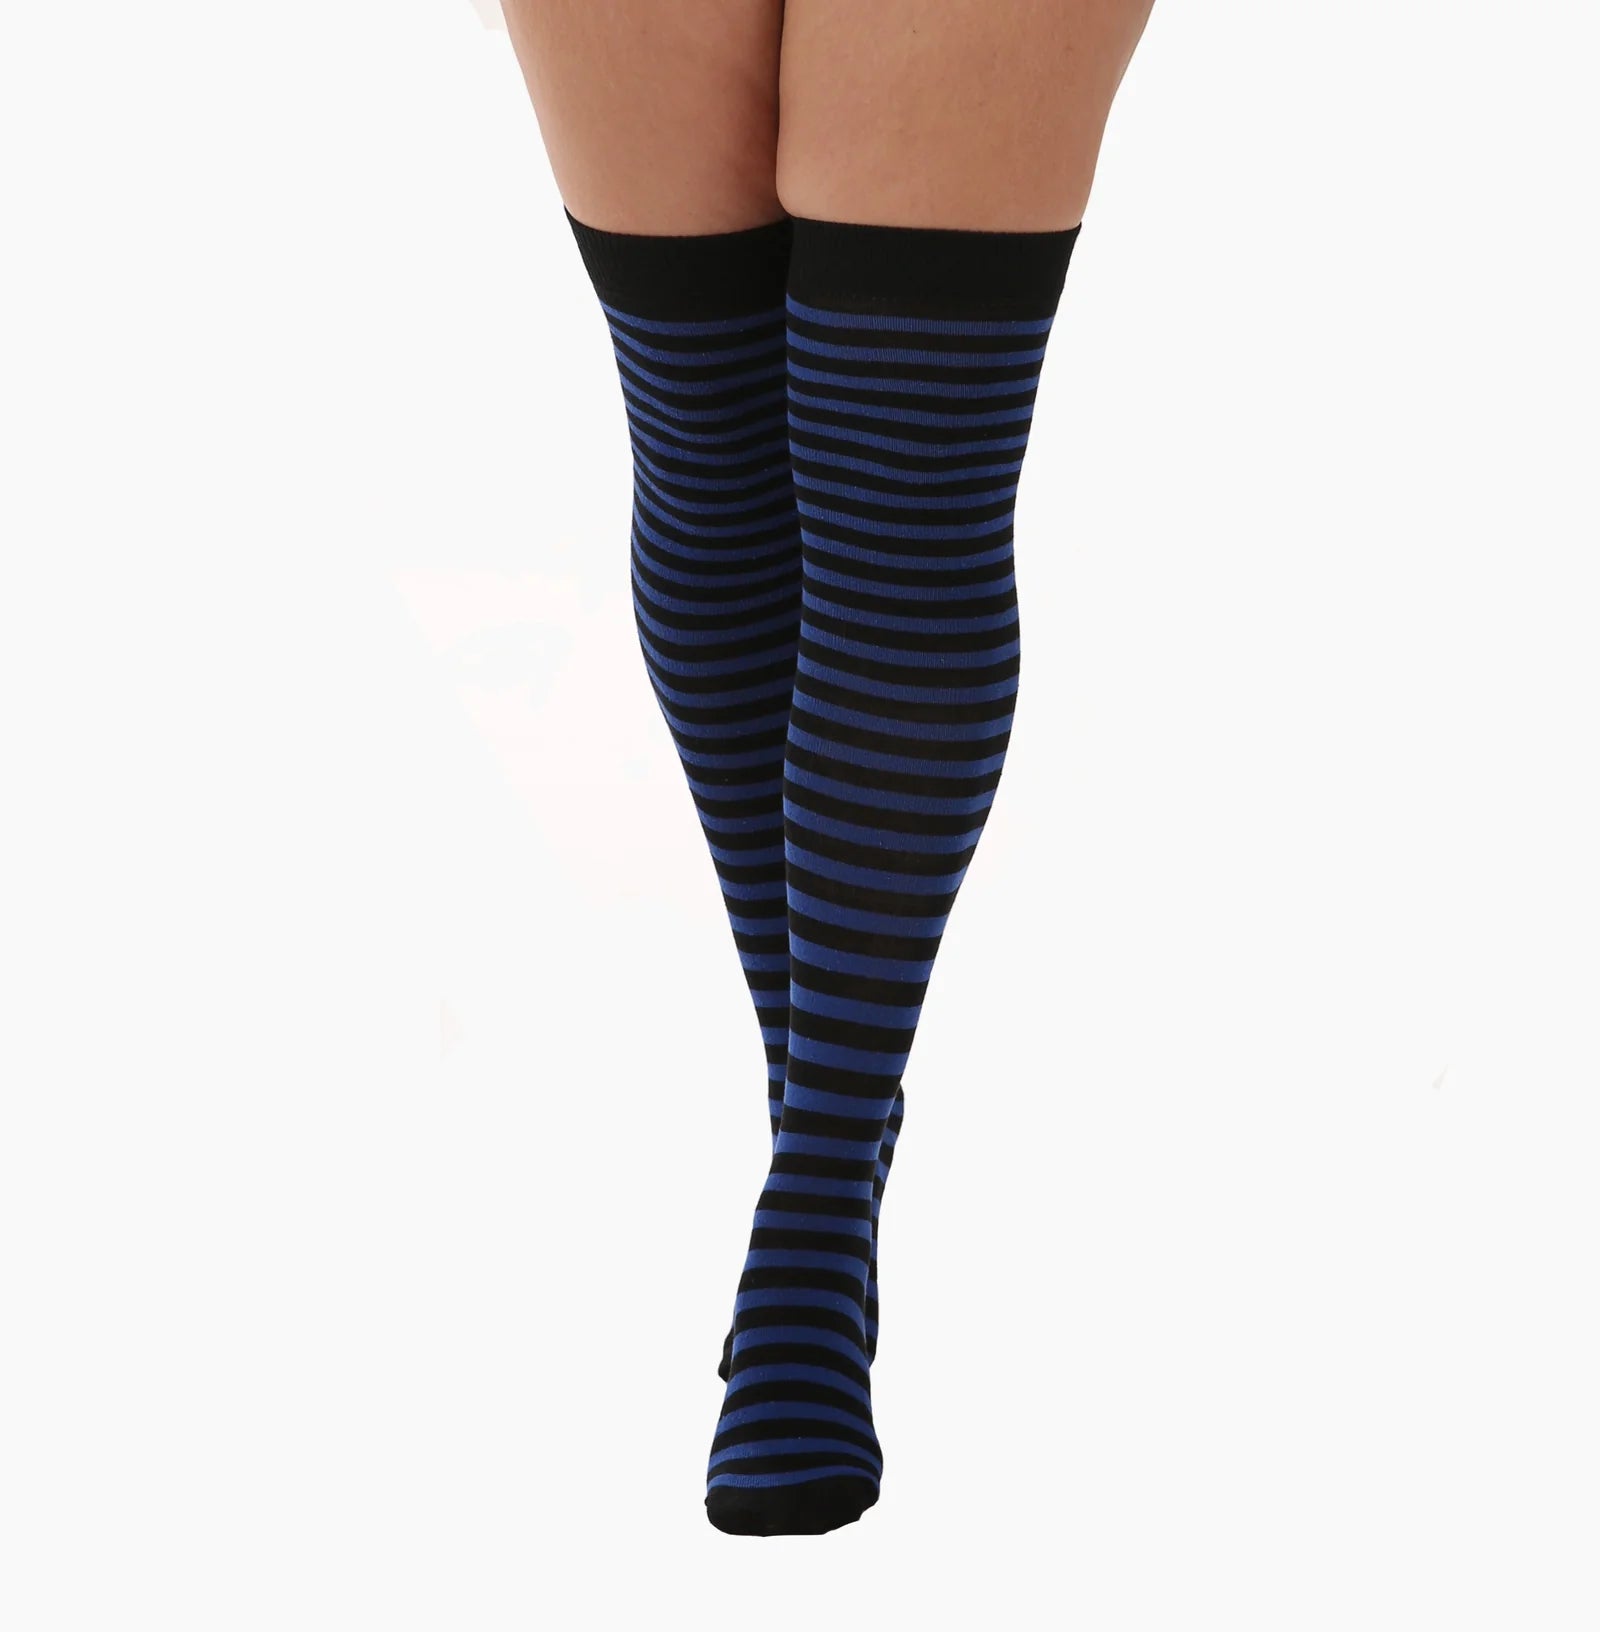 Striped Over The Knee Socks in Blue and Black - The Sockery